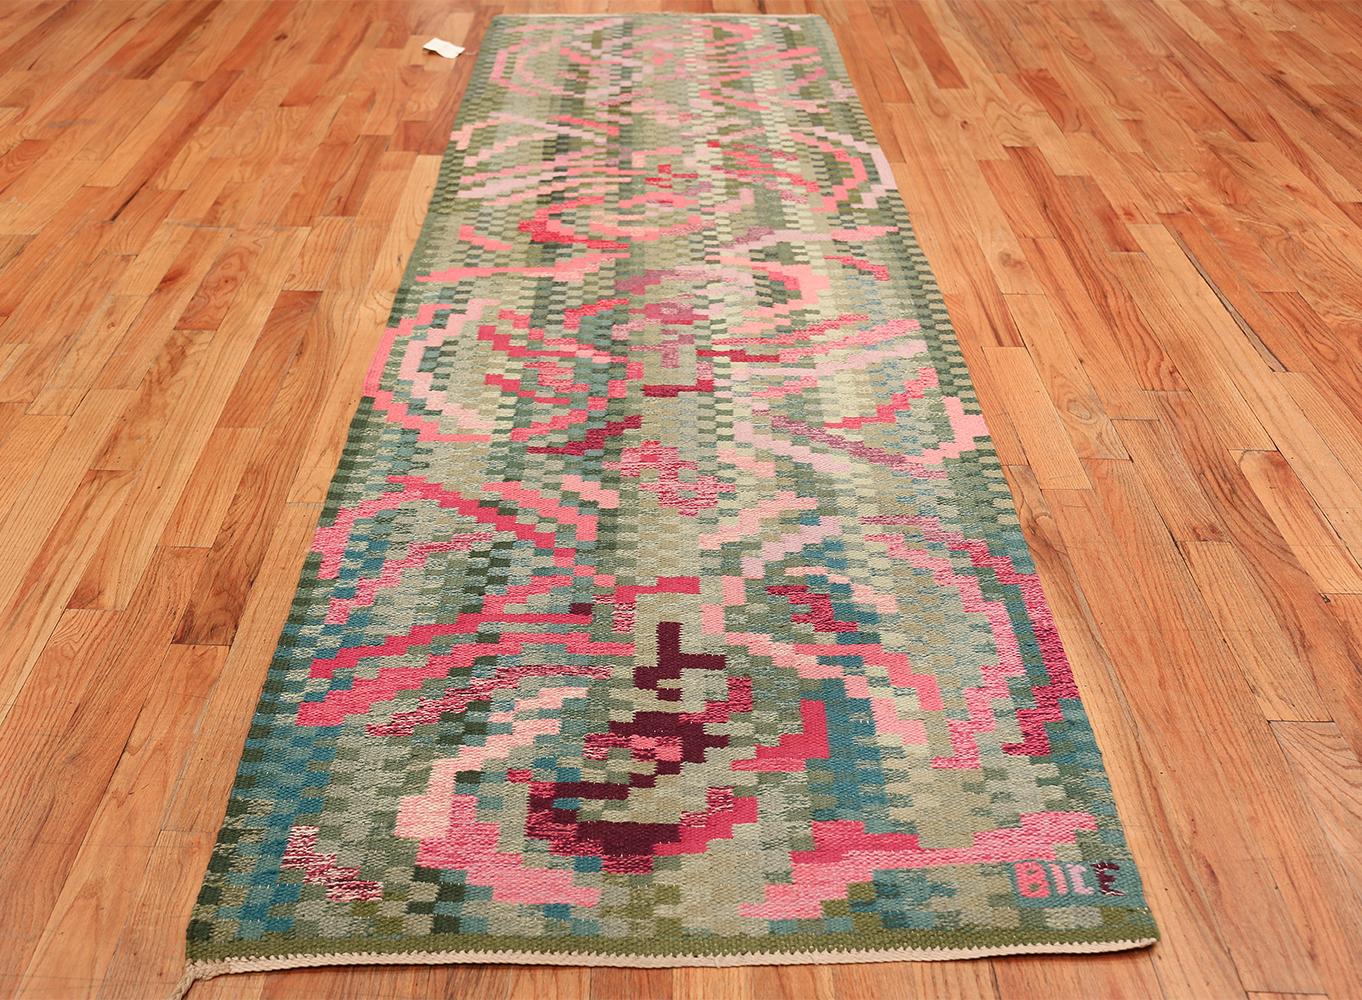 Vintage Swedish Runner rug signed BICE, origin: Sweden, circa mid-20th century. Size: 3 ft. 5 in x 11 ft. 2 in (1.04 m x 3.4 m)

In recent years, interior decorators, designers, and other creative professionals have rediscovered the unique allure